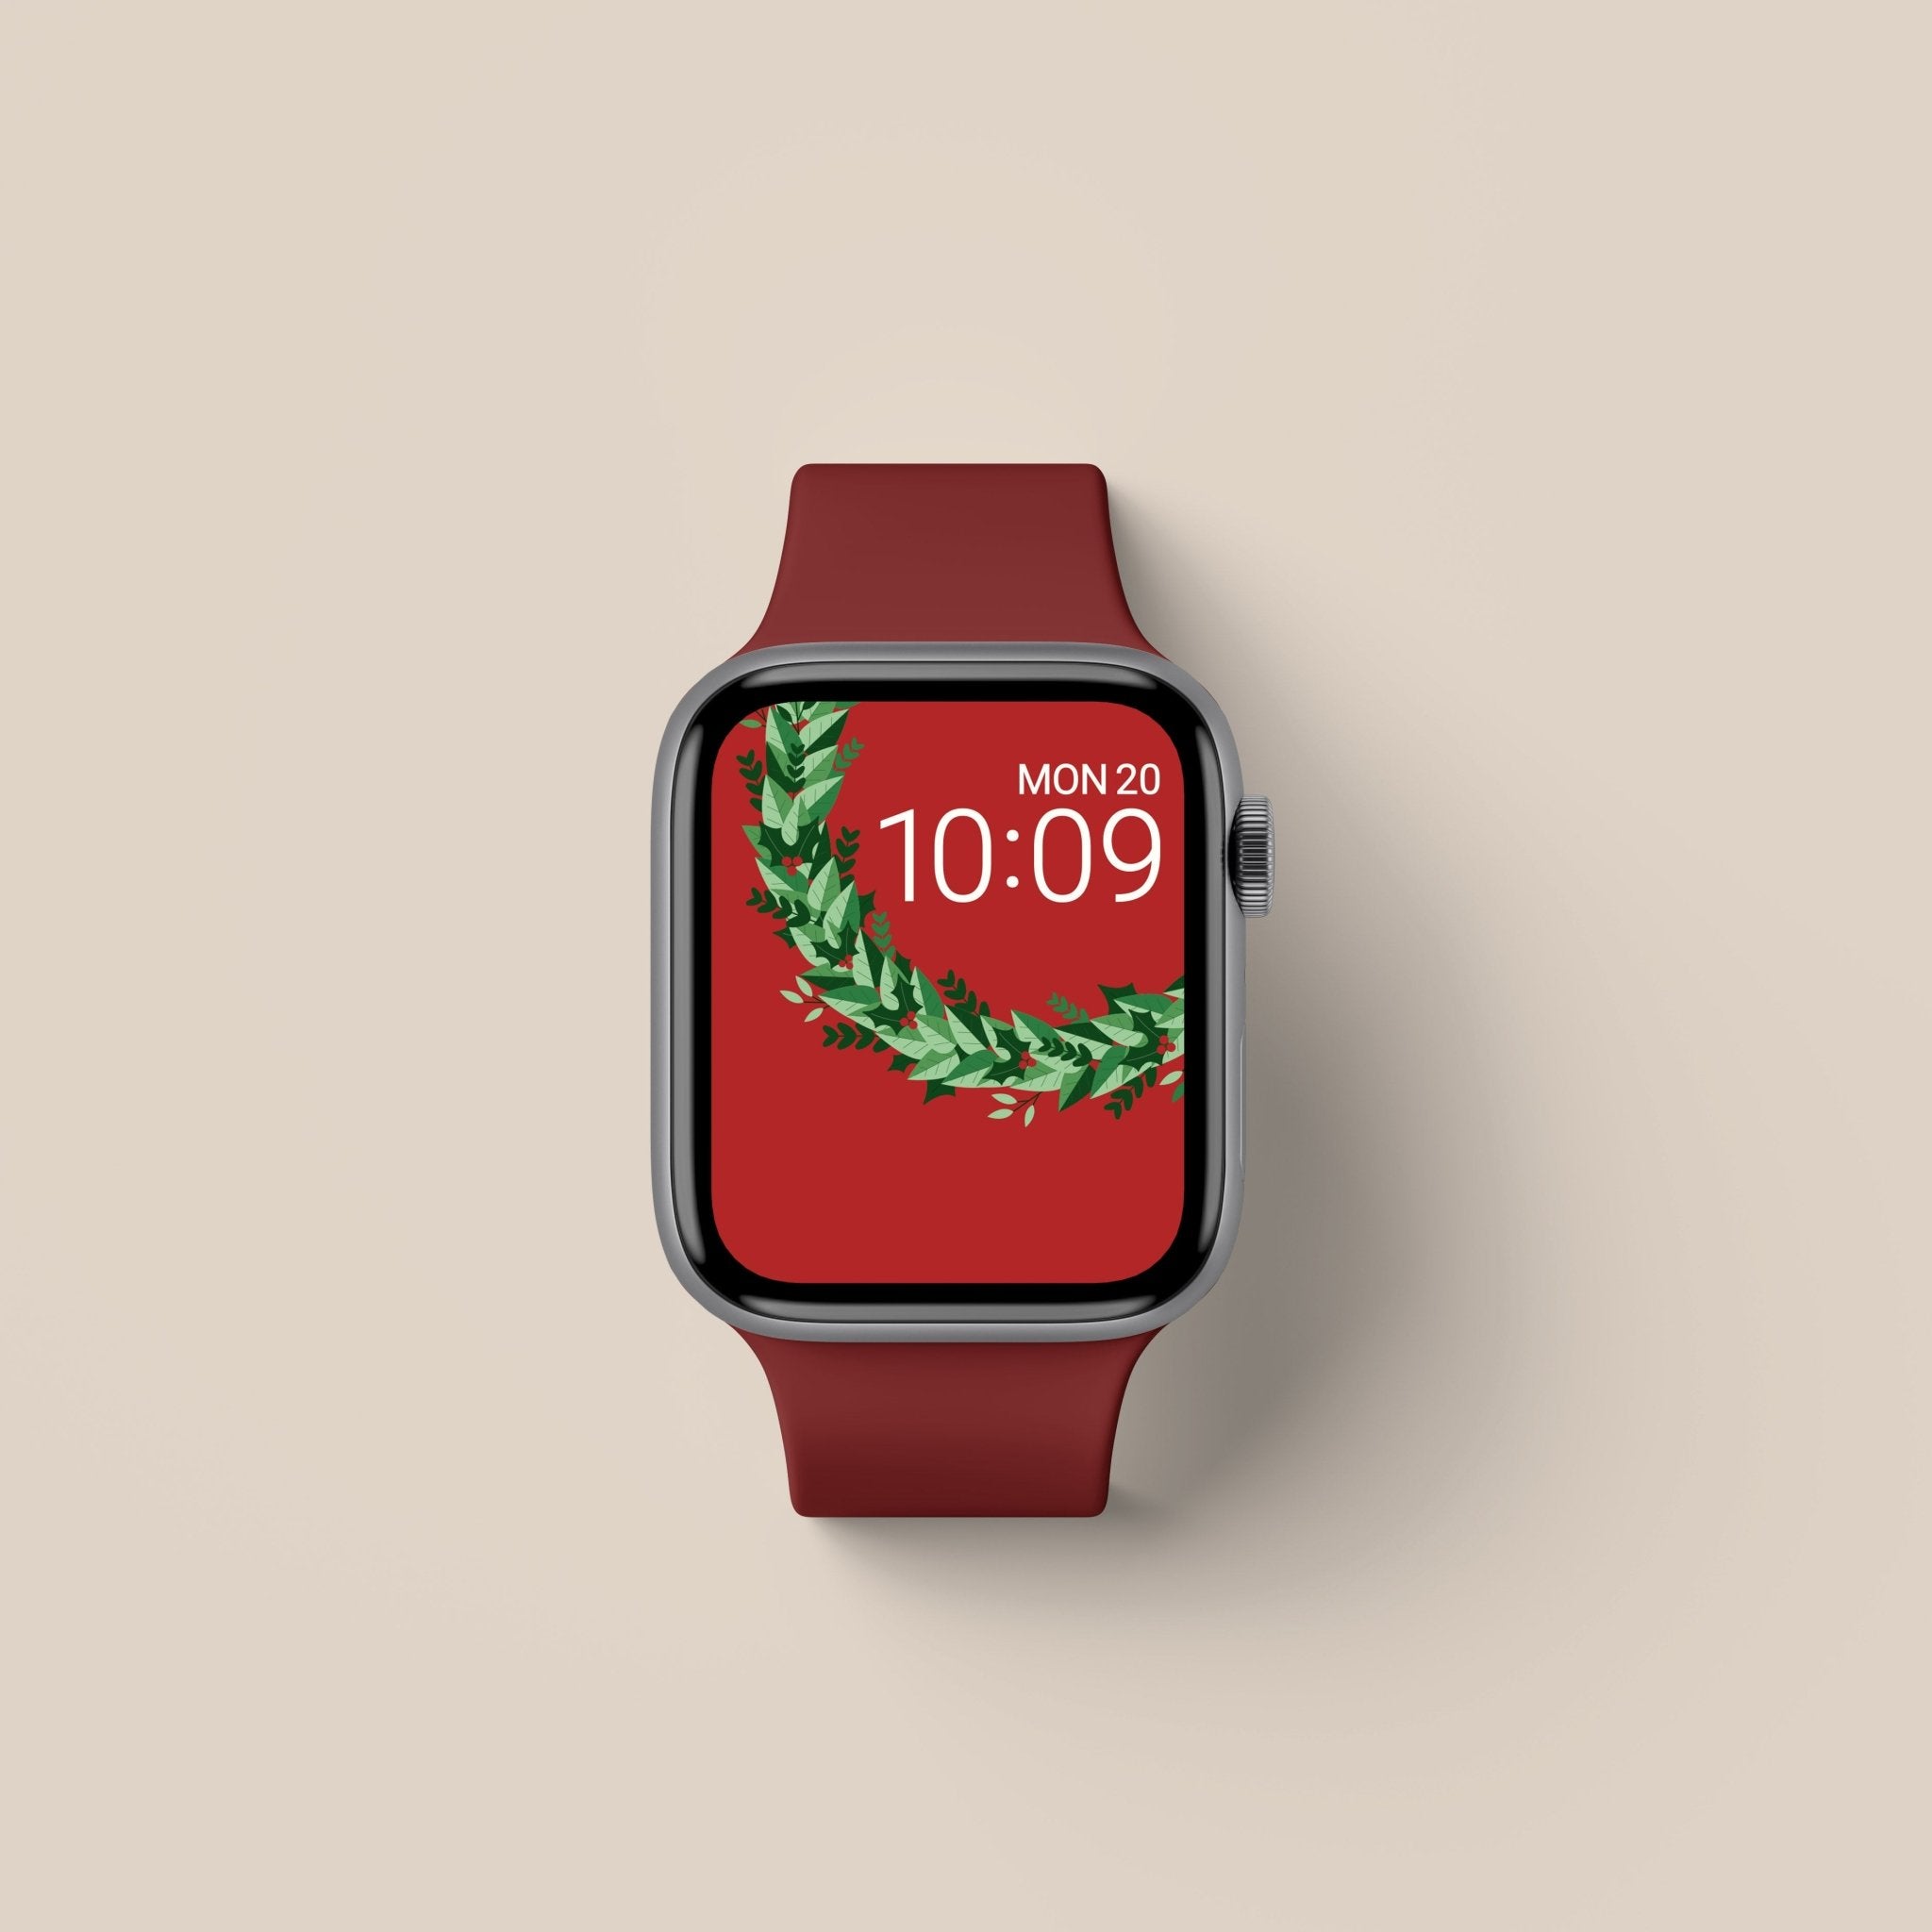 Xmas Apple Watch Wallpapers (4 Pack) - Buckle and Band - XMAS-CL